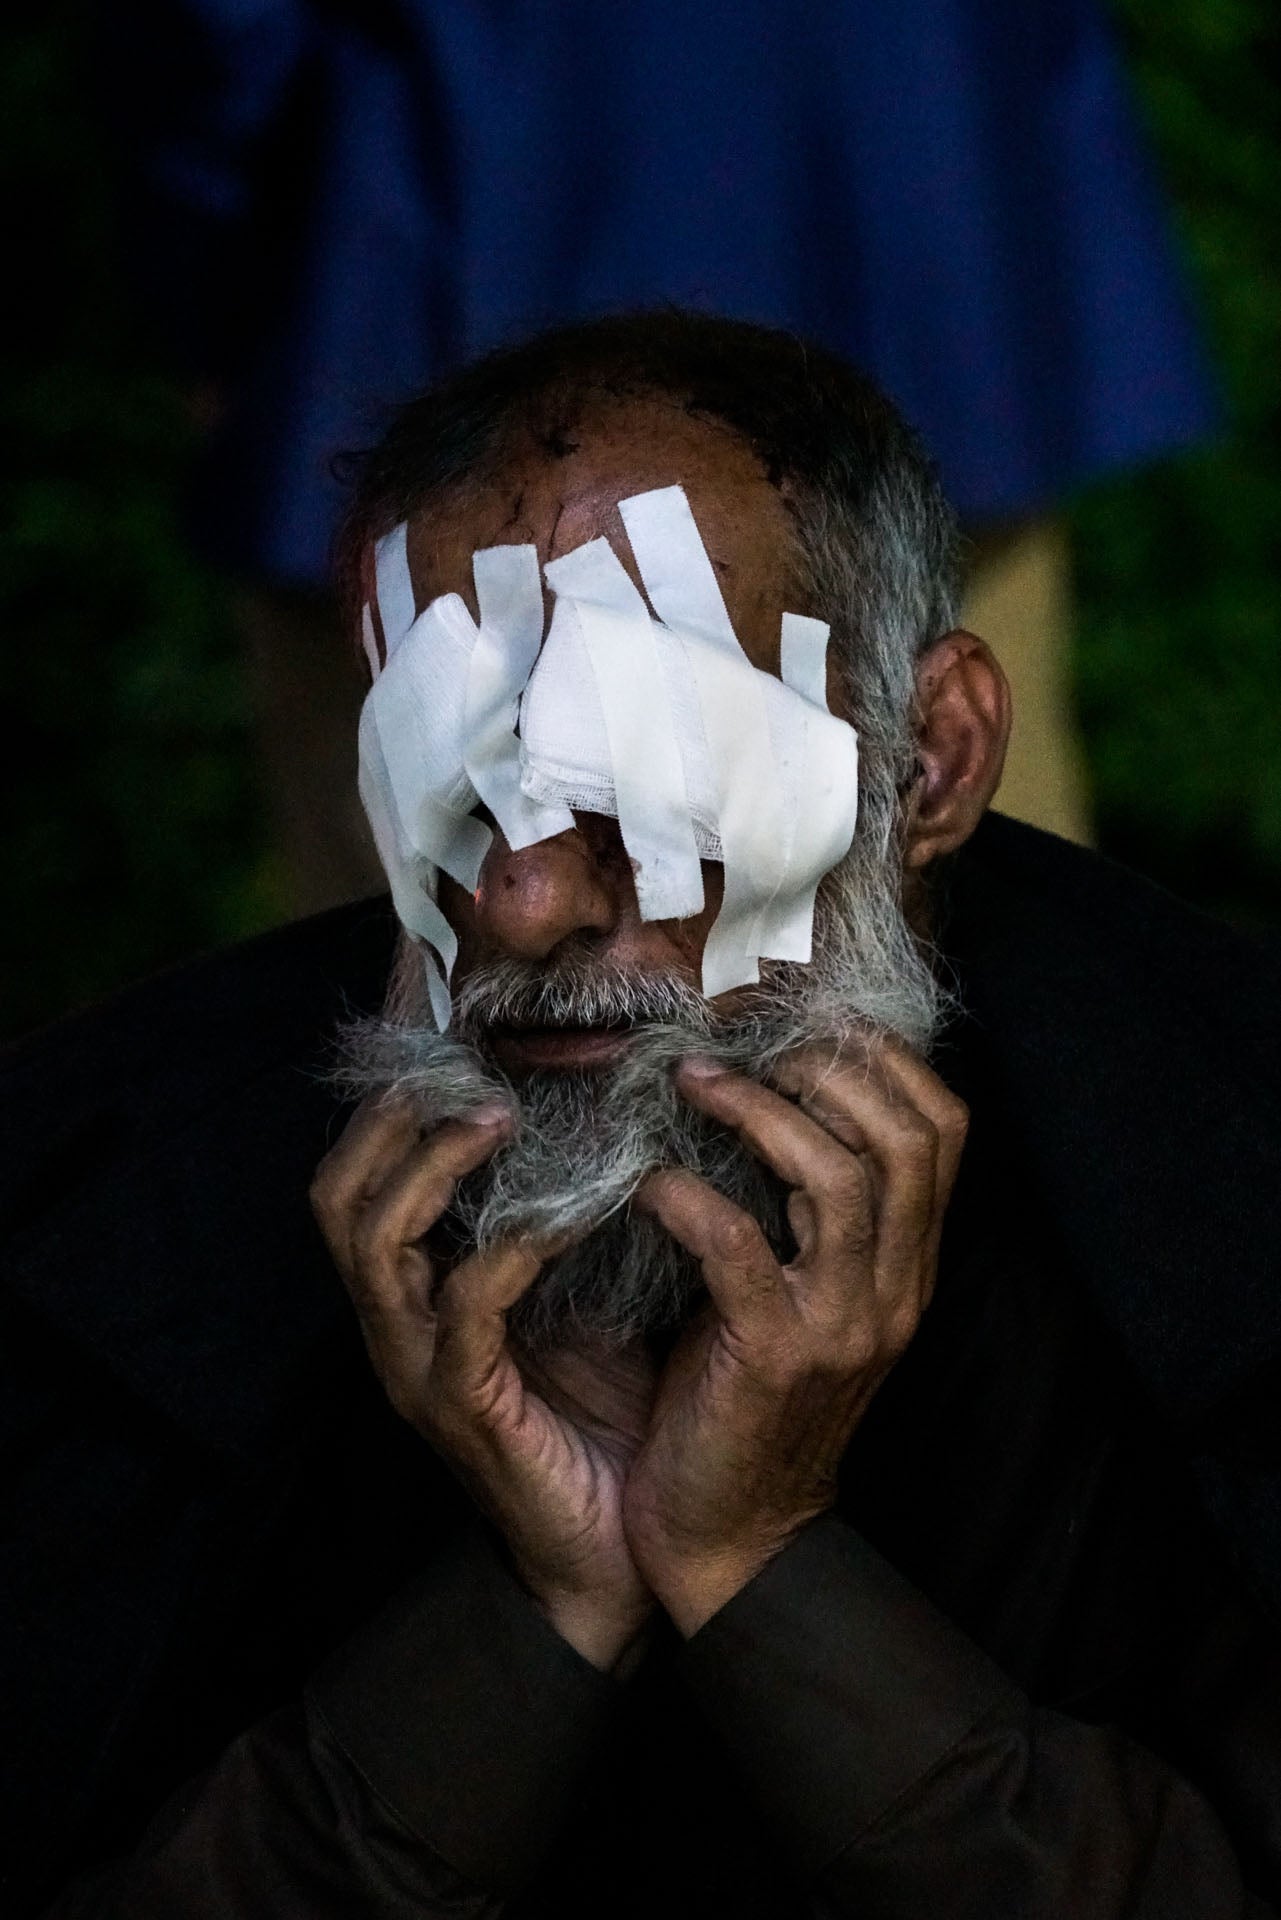 Adnan Thanon Younis was blinded by an exploding shell in Mosul